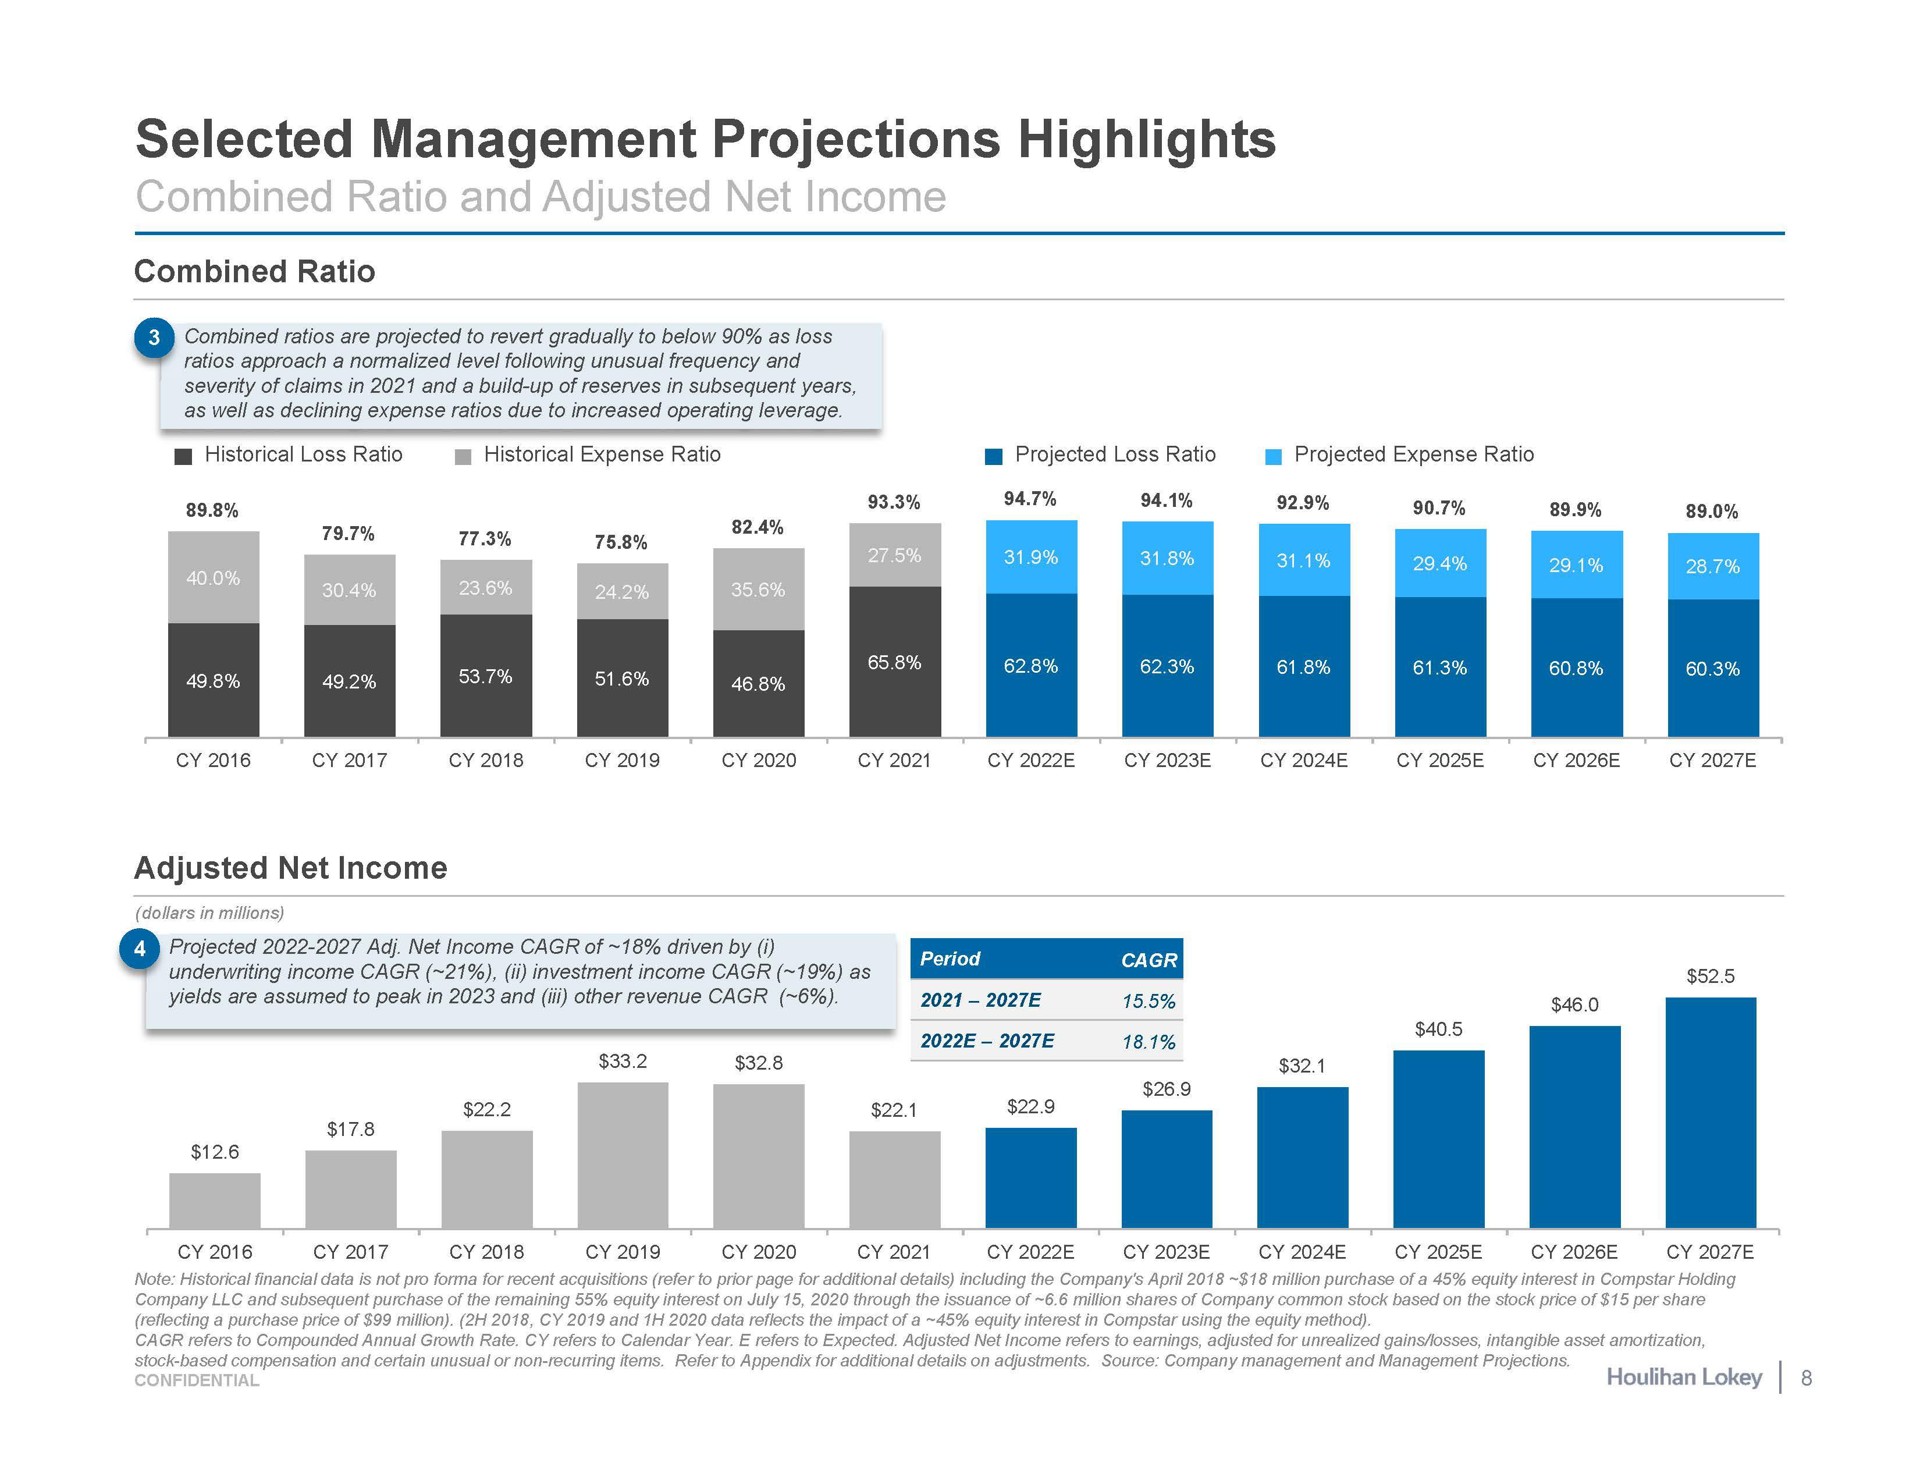 selected management projections highlights projected net income of driven by i | Houlihan Lokey